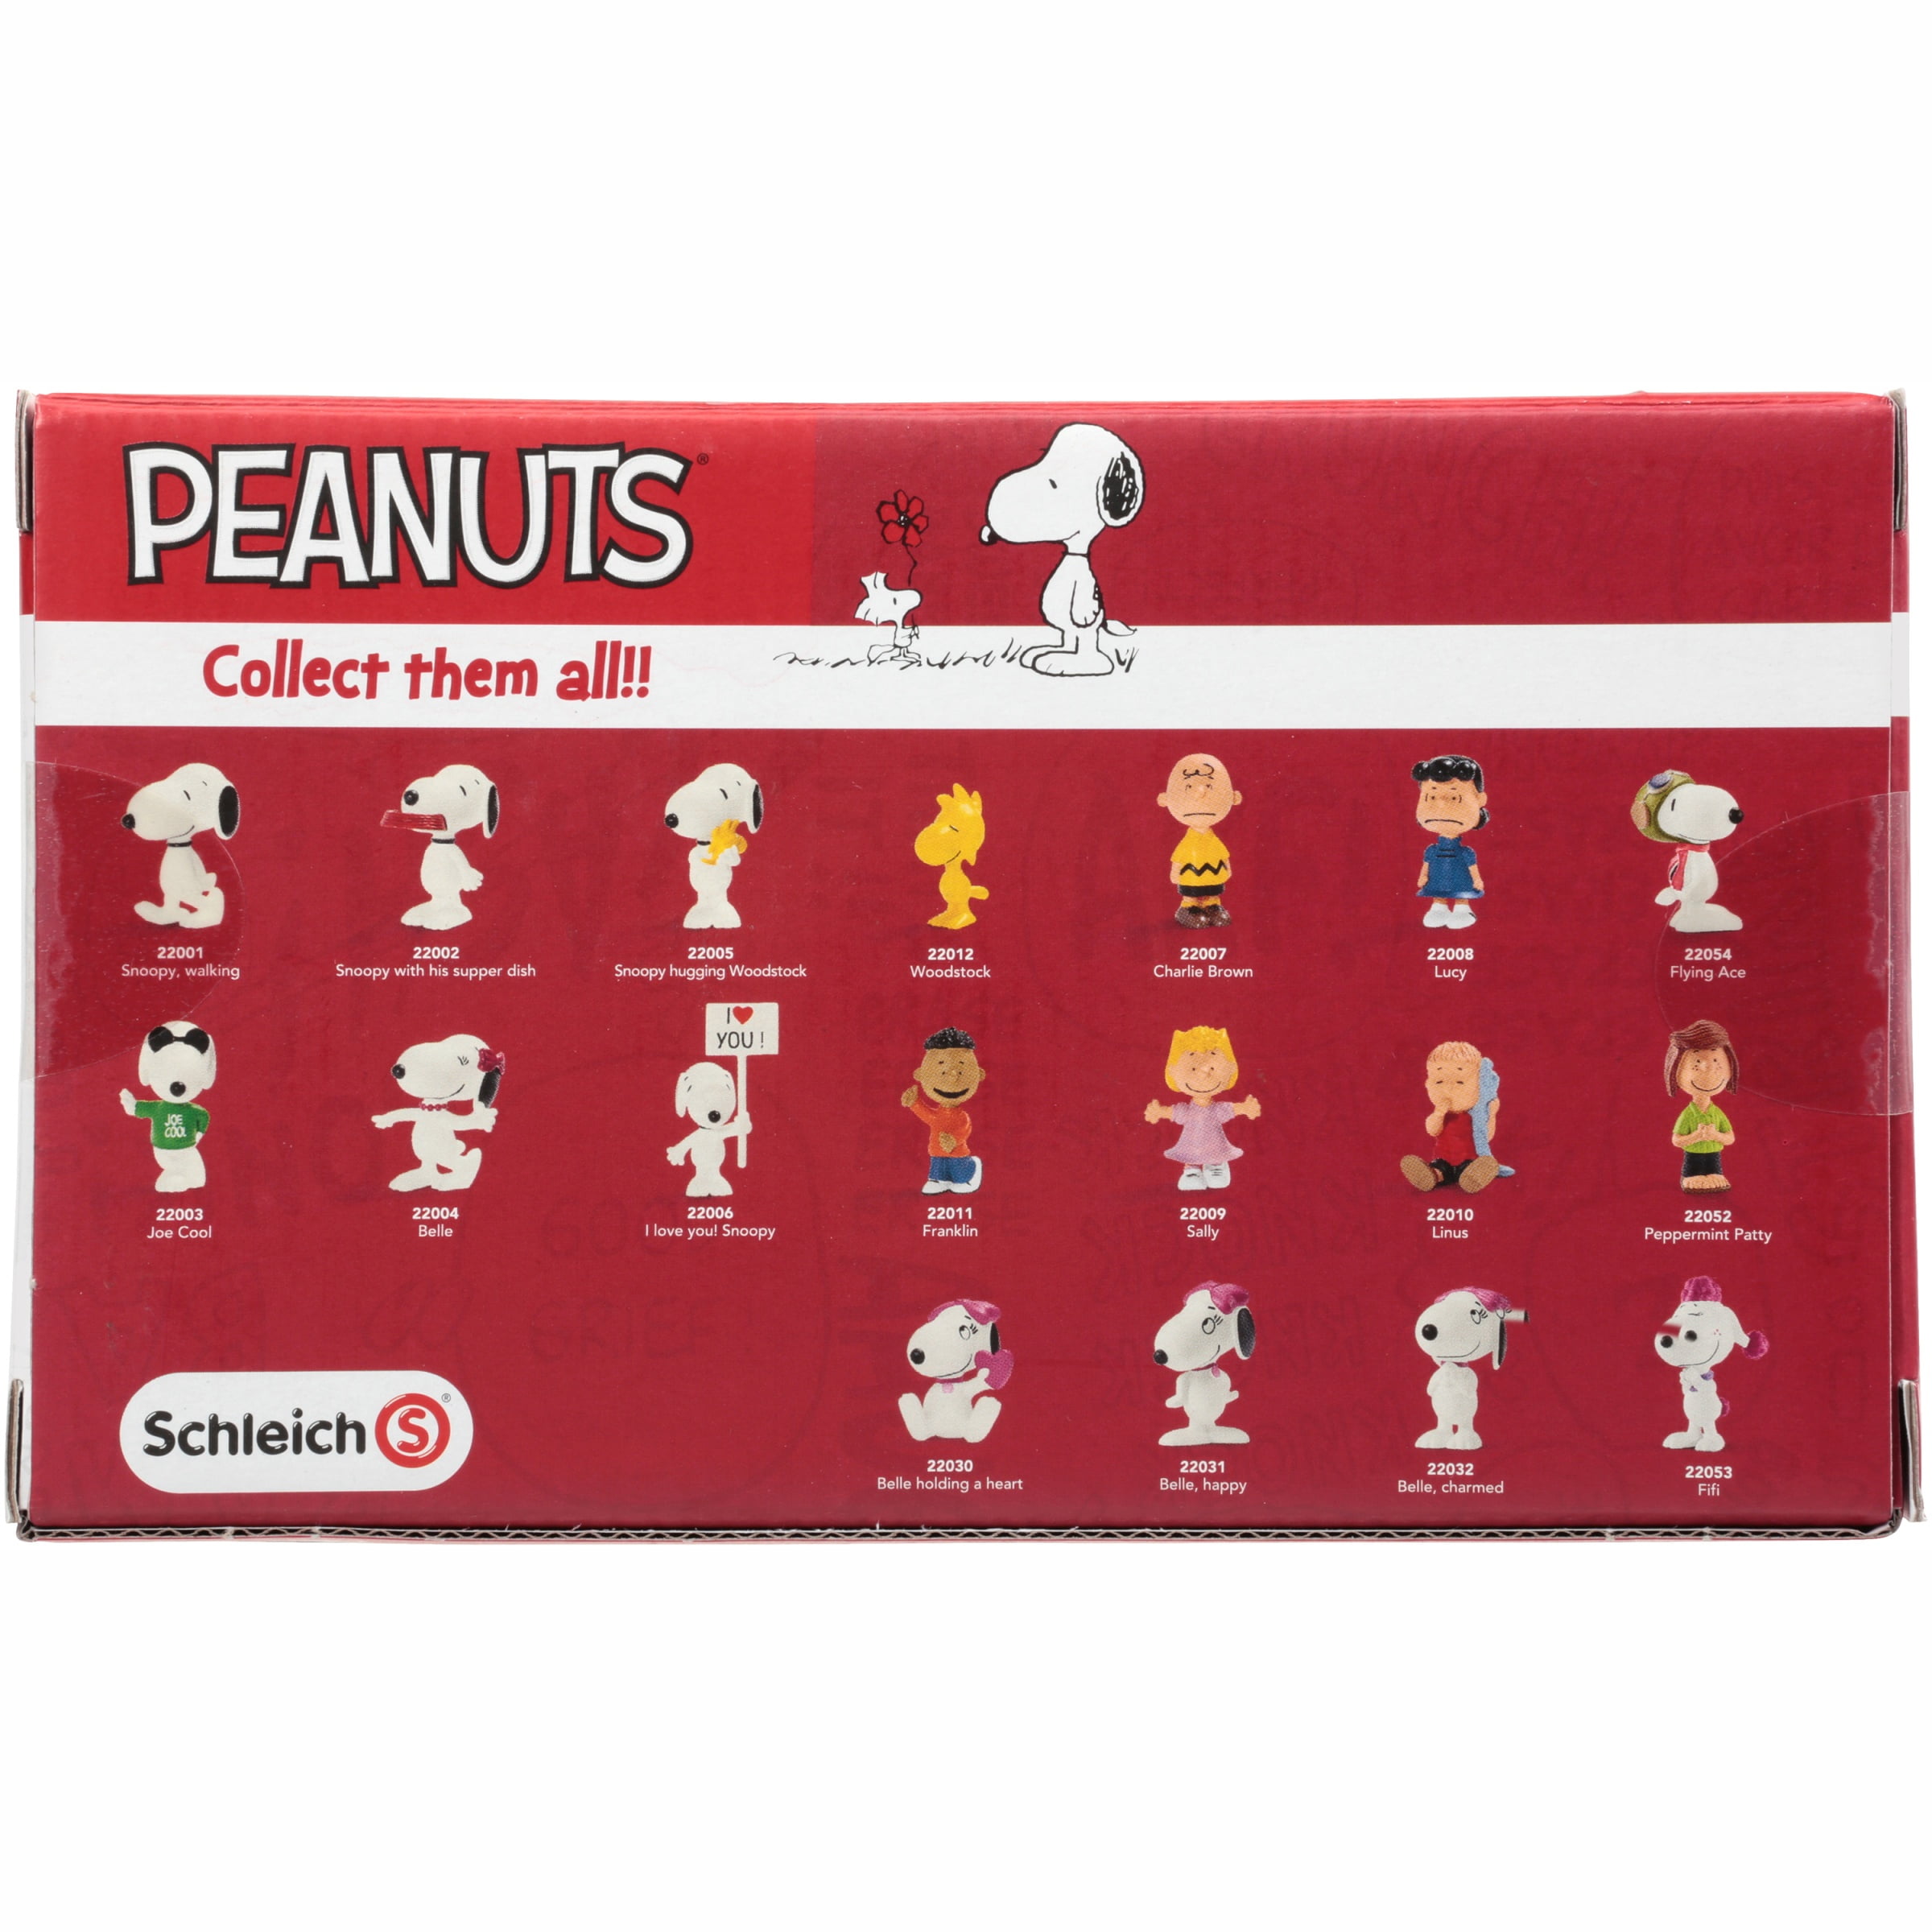 Schleich® Peanuts Snoopy's Sibilings Toy 3 pc Box